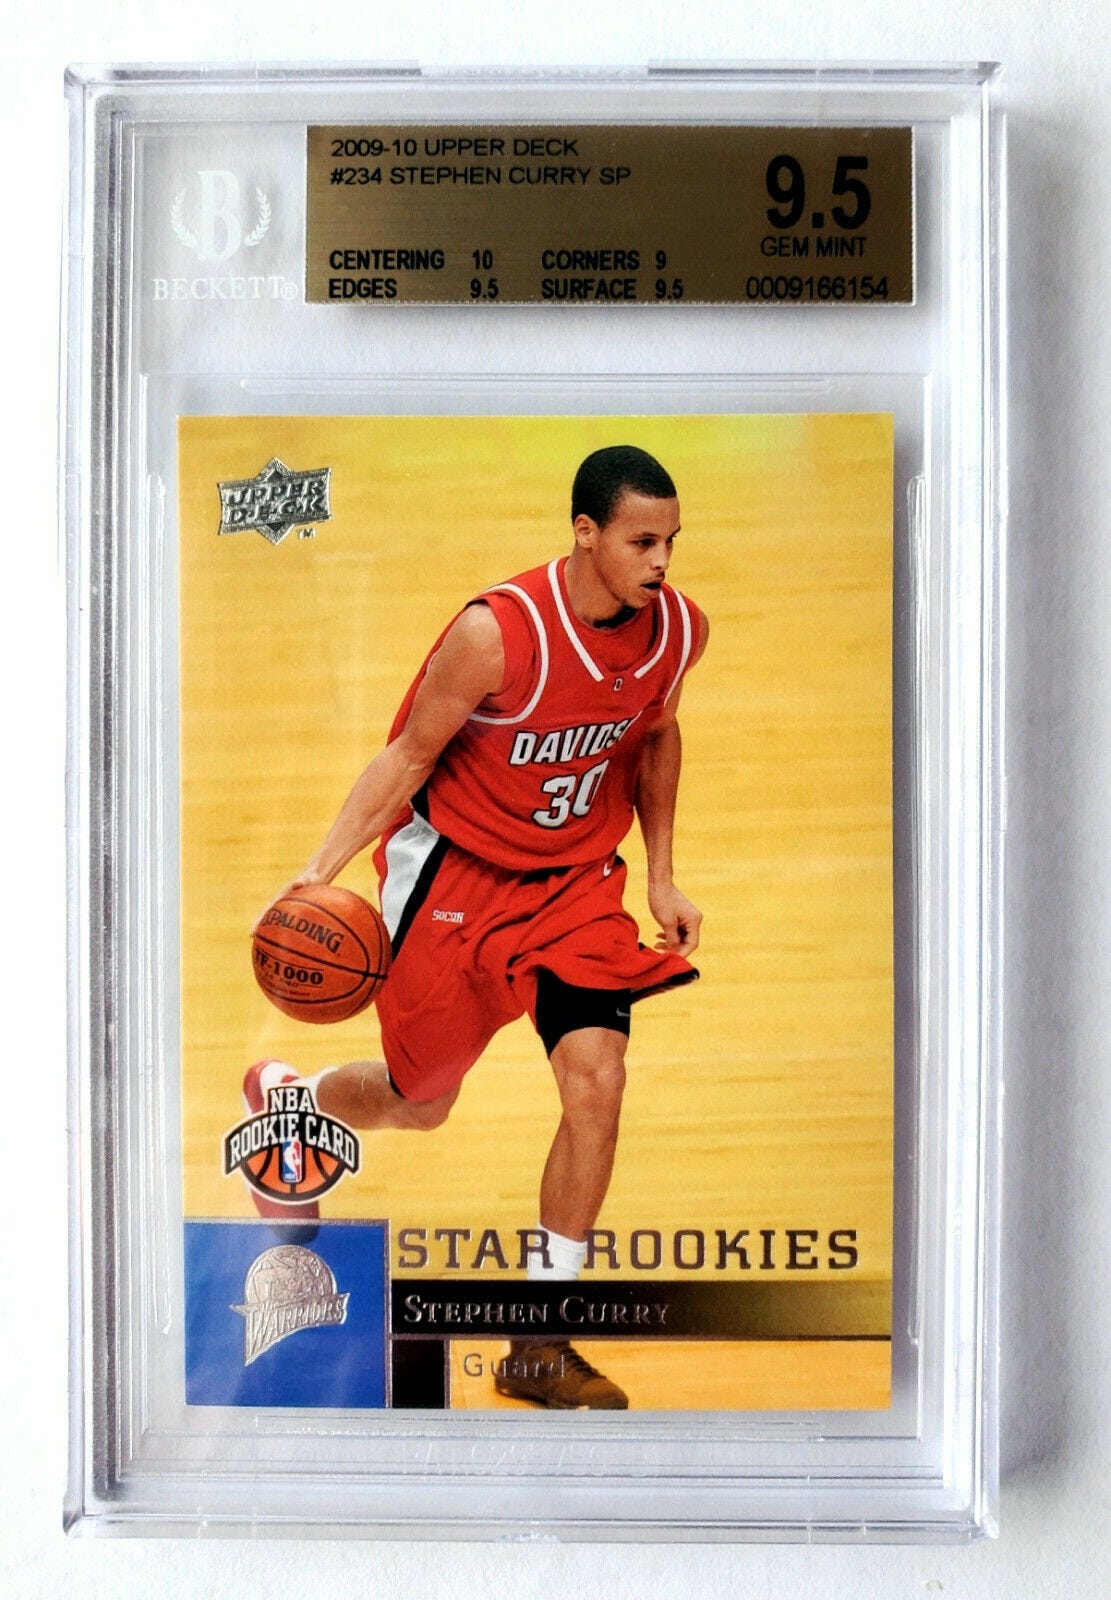 Image 1 - 2009-10-Upper-Deck-UD-Stephen-Curry-ROOKIE-CARD-234-BGS-9-5-10-CENTERING